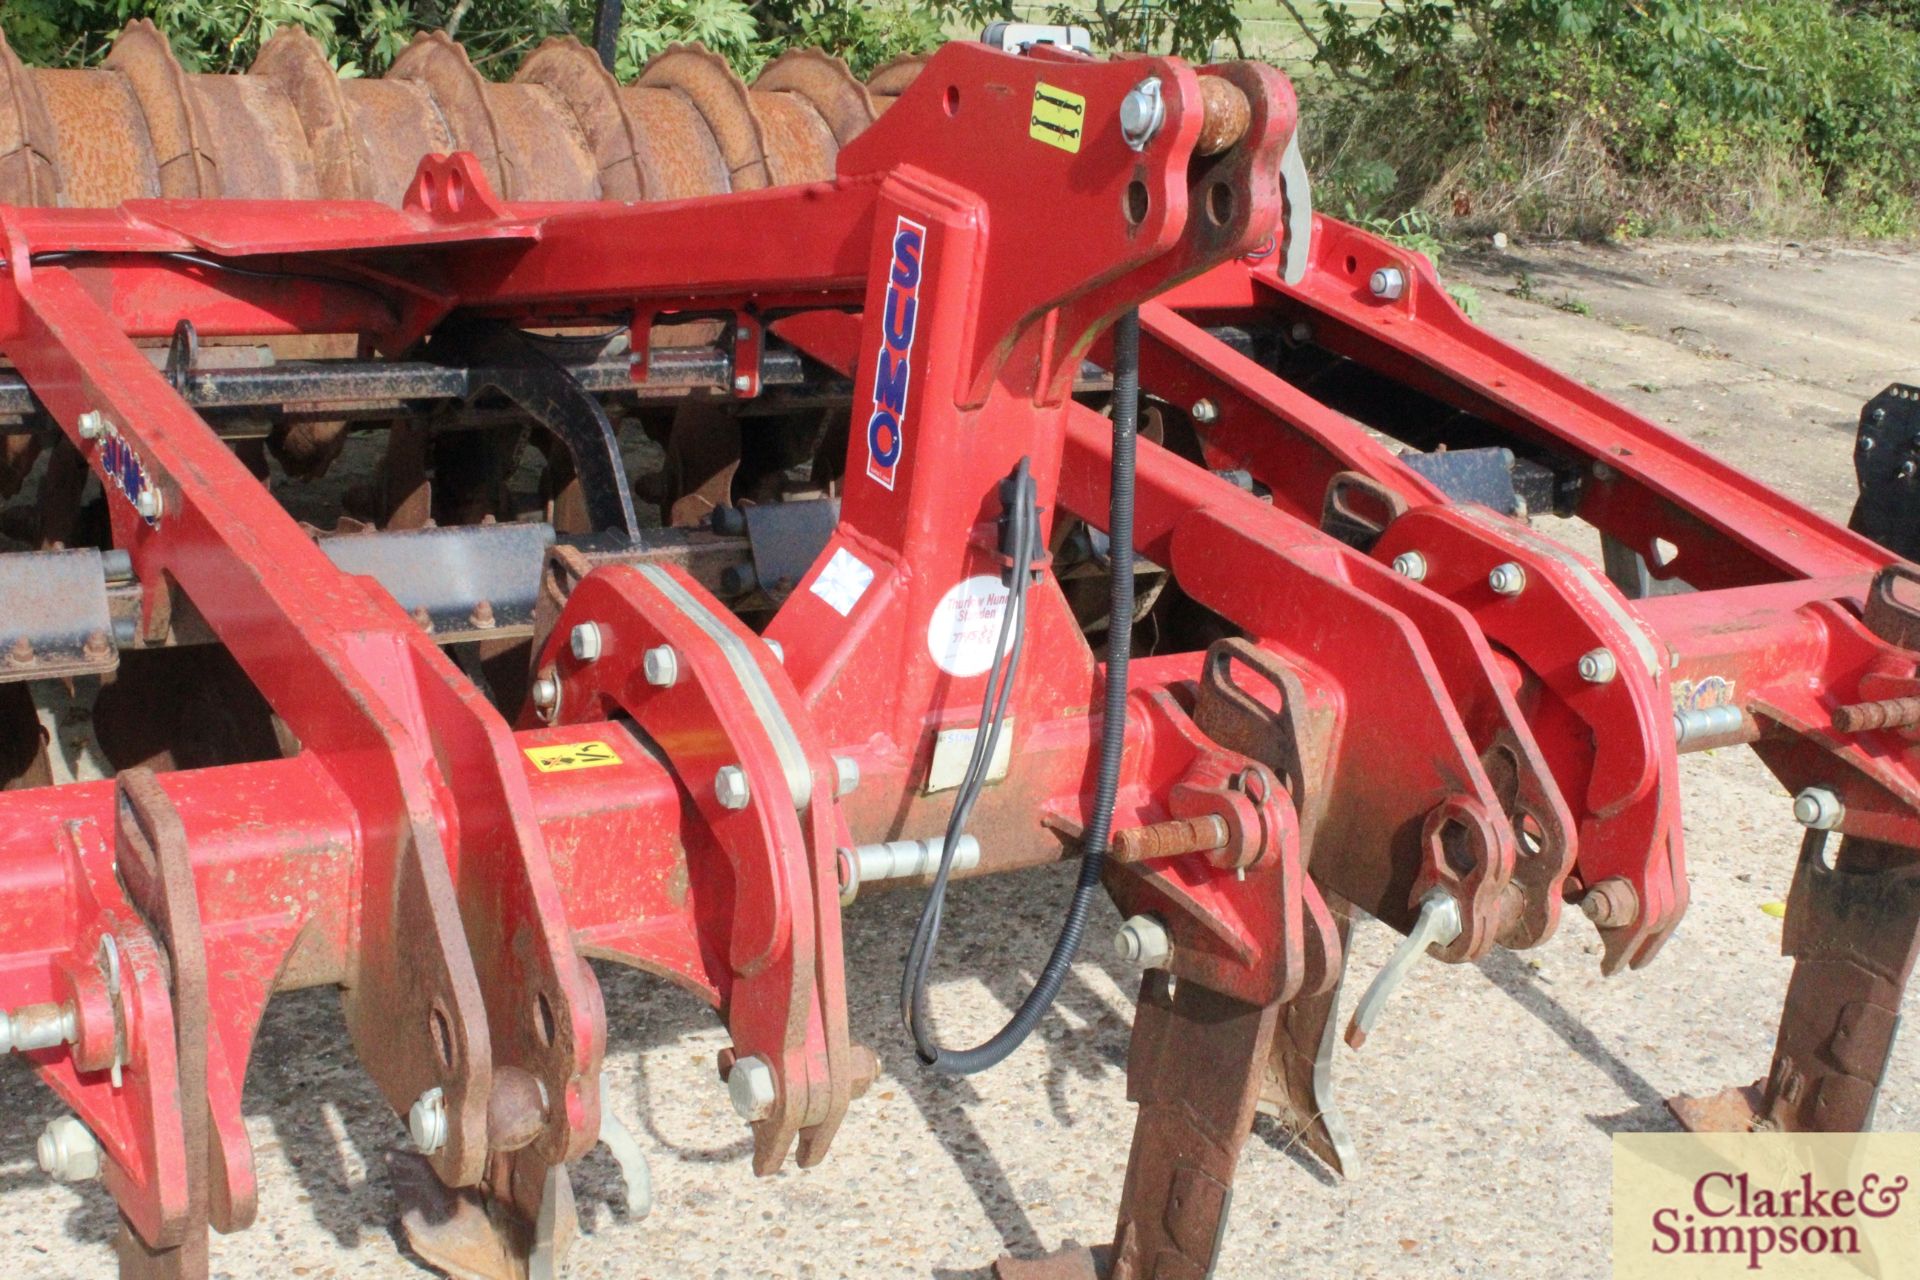 Sumo Trio 3 3m mounted cultivator 2012. Serial number 11626. With six Metcalfe low disturbance legs, - Image 5 of 21